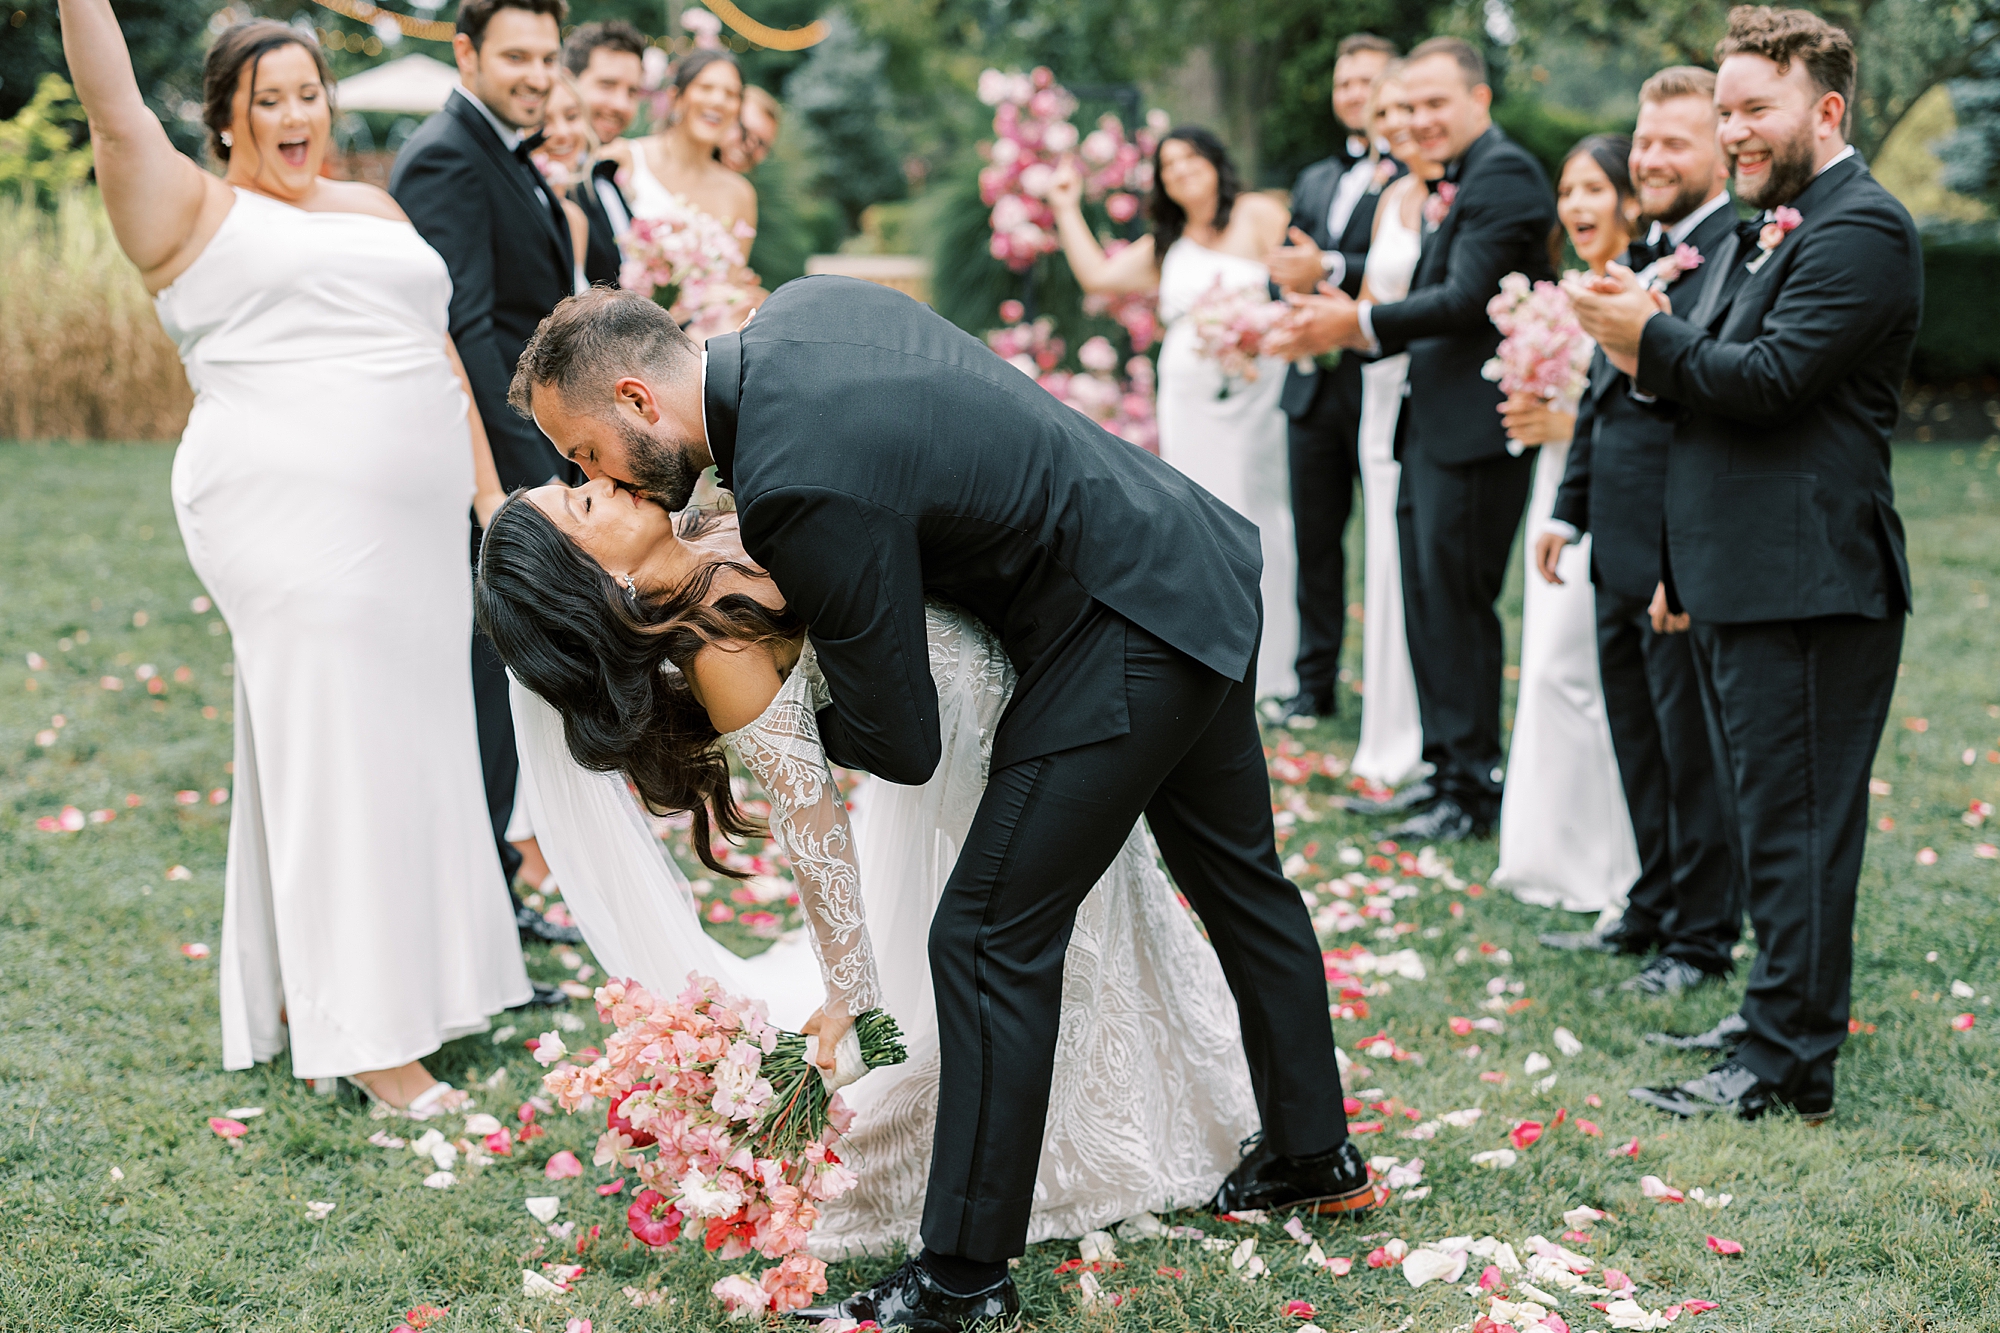 groom dips bride in aisle kissing her after wedding ceremony 